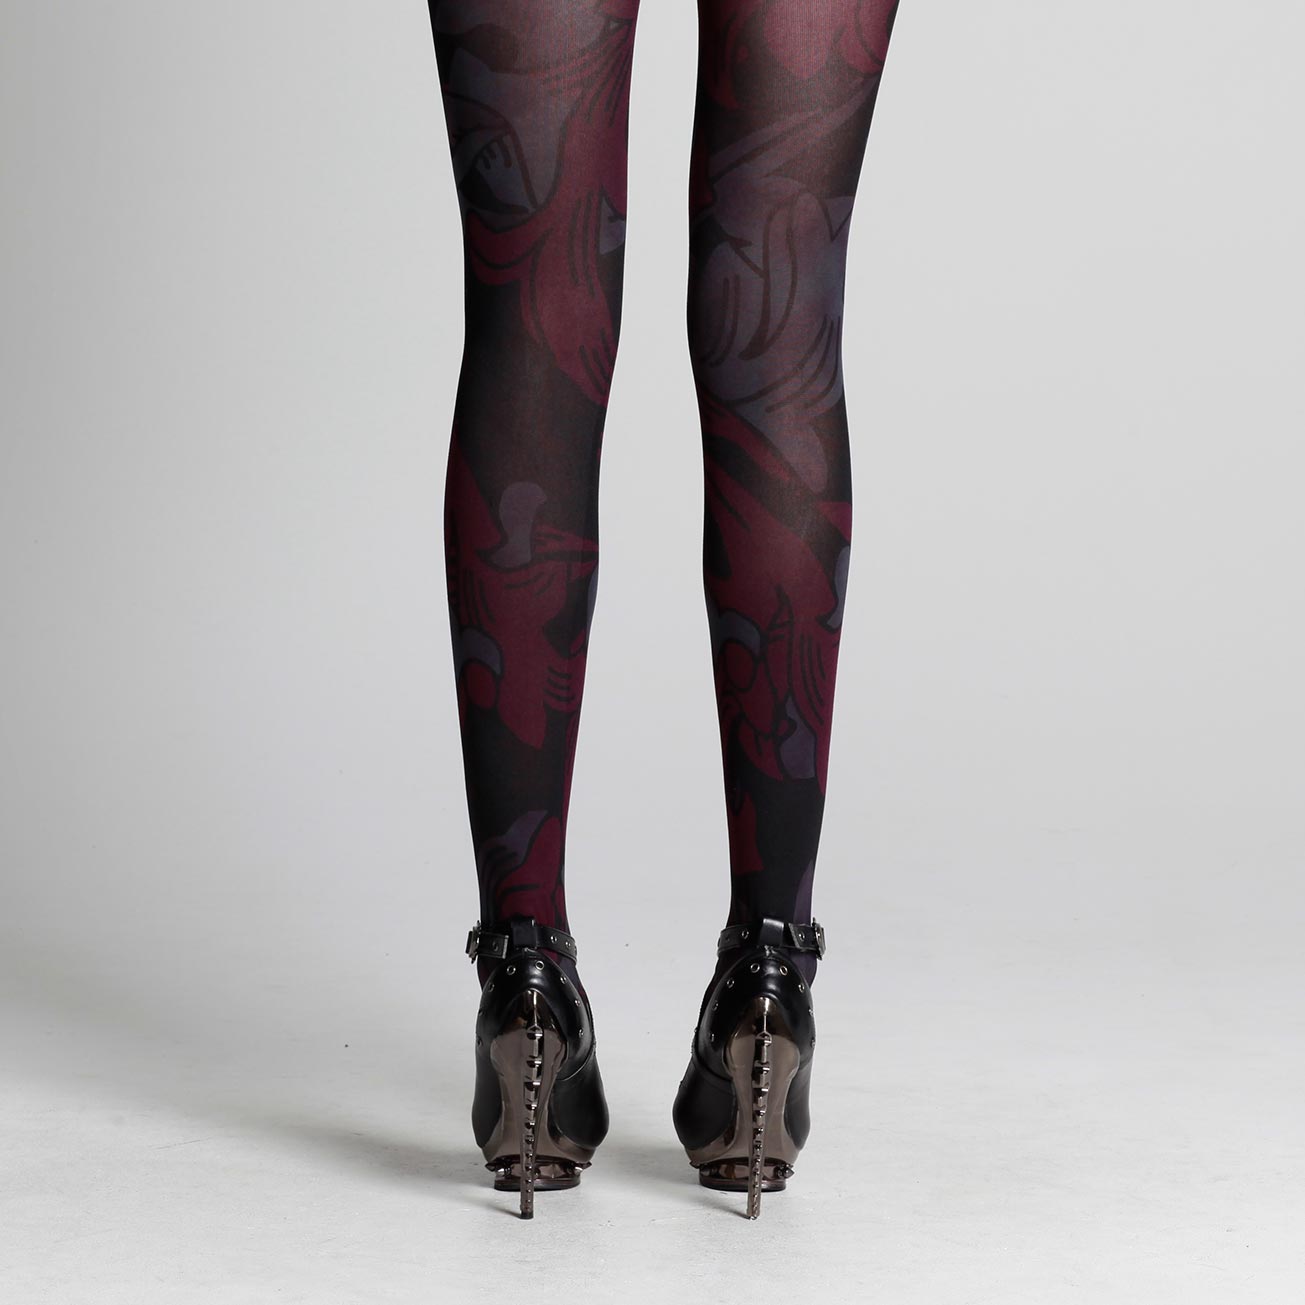 CAMOUFLAGE TIGHTS